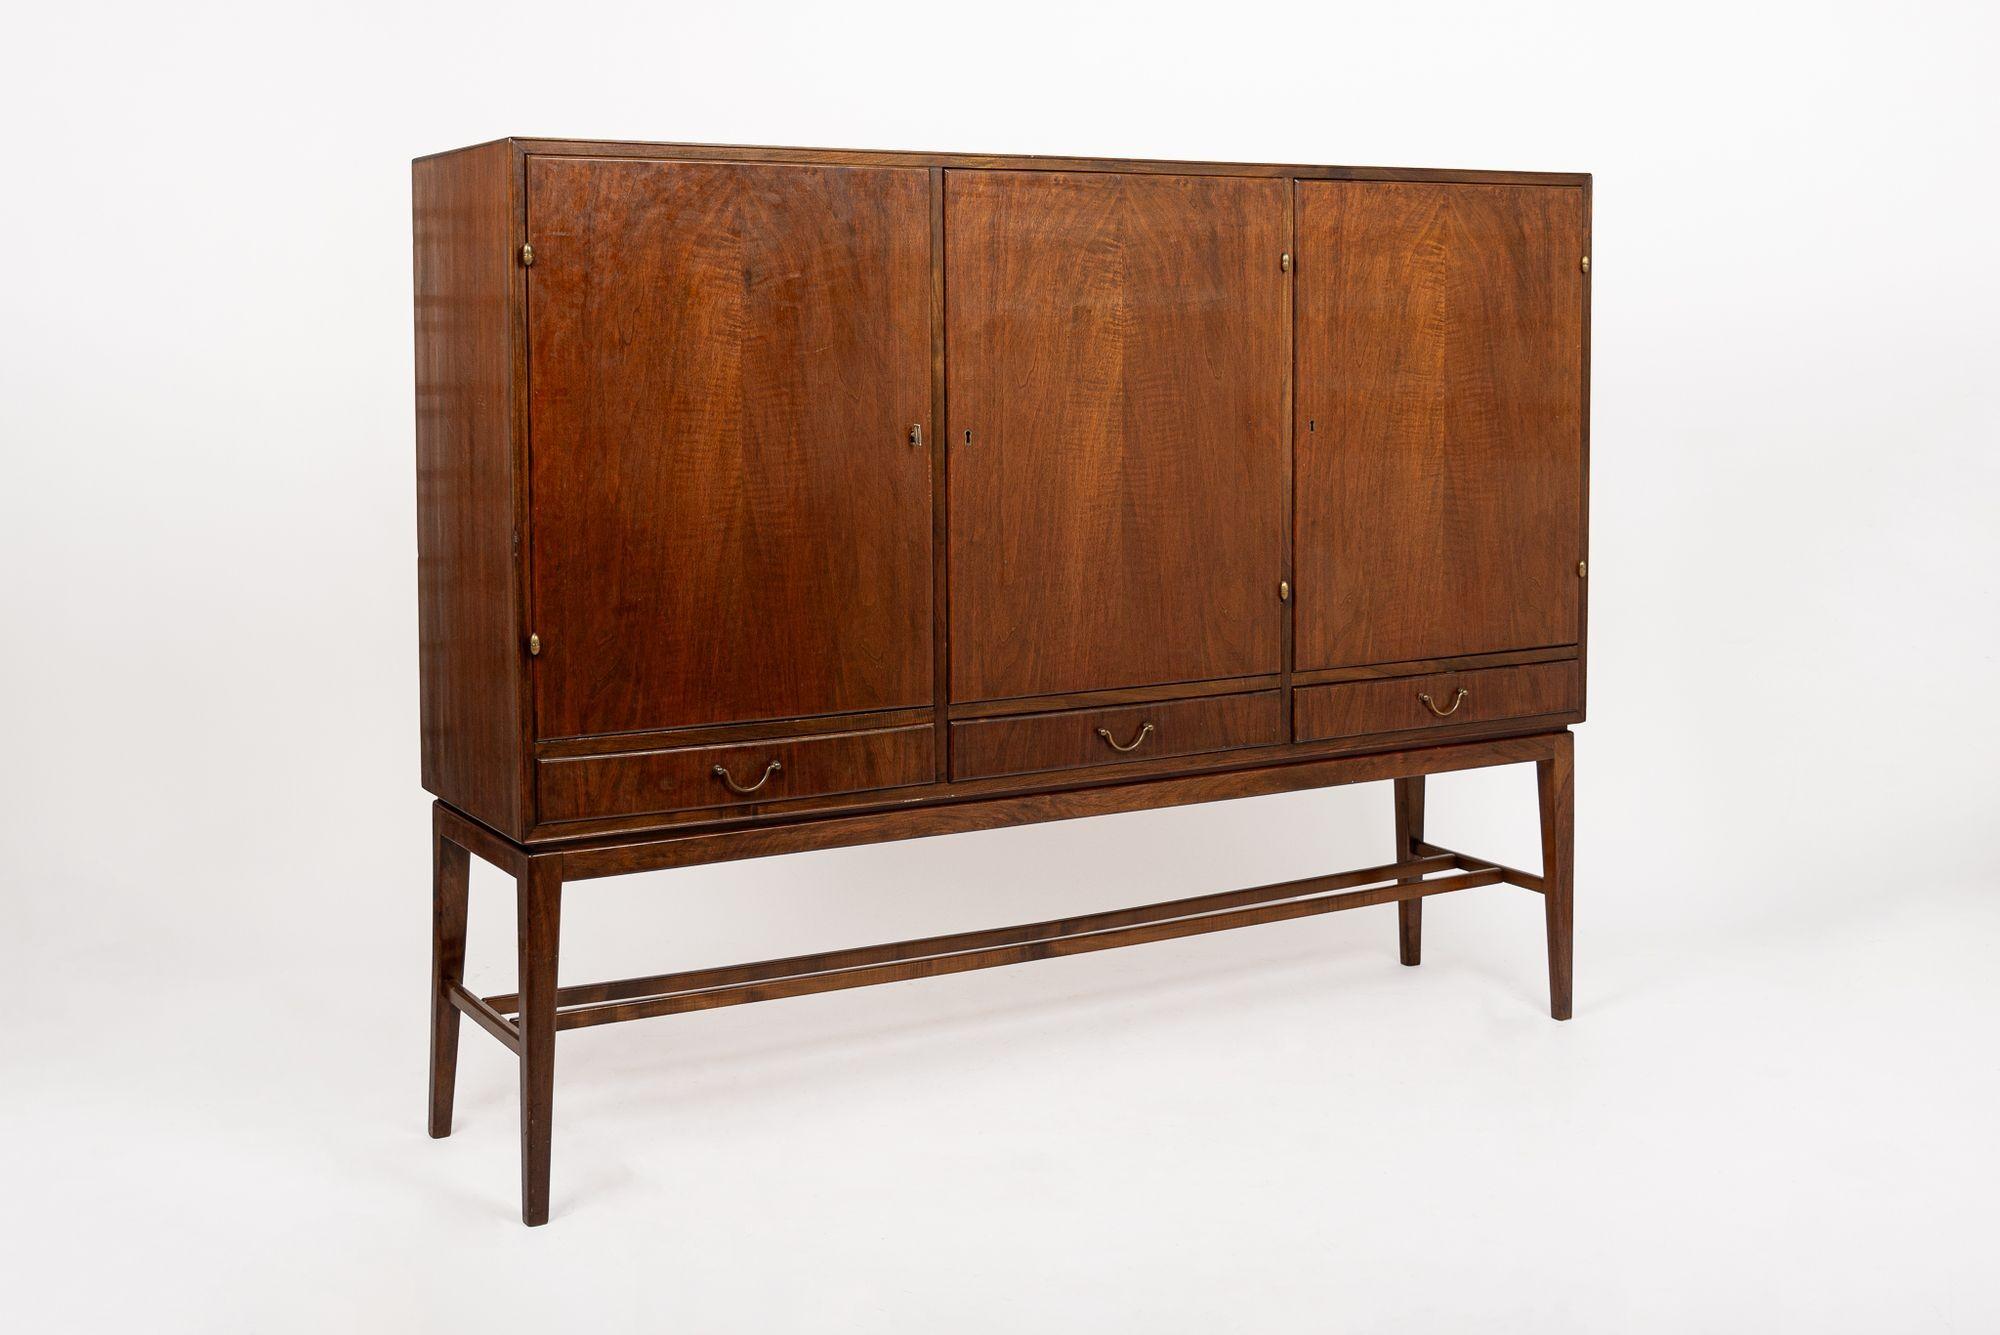 This vintage mid century credenza modern tall cabinet credenza or sideboard cabinet attributed to Frits Henningsen was made in Denmark circa 1960. This cabinetmaker style credenza or server features classic Danish modern styling with a minimalist